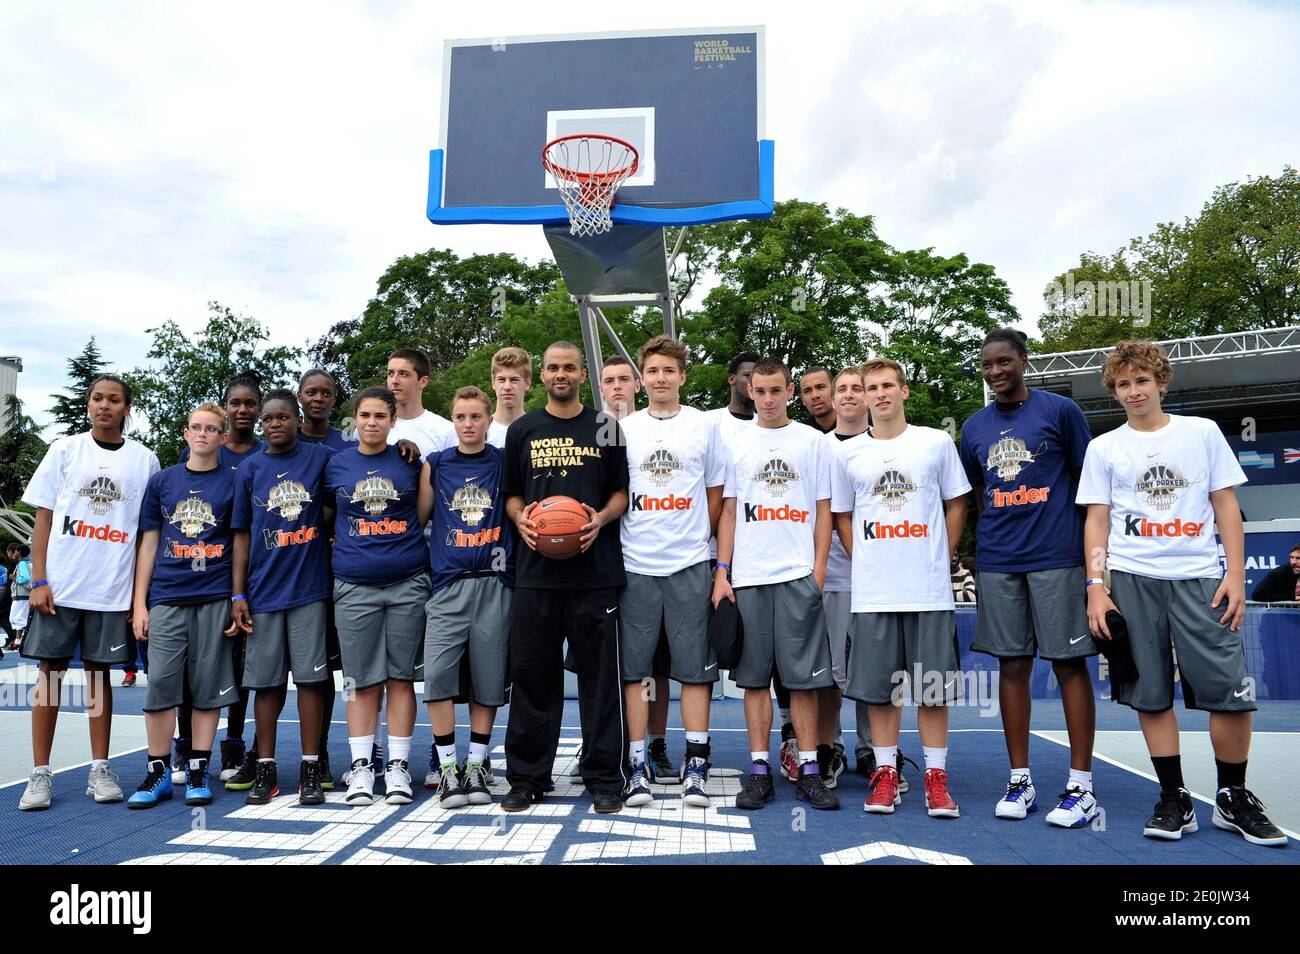 The youth team and Tony Parker member of the french national basketball  team, pose during the World Basketball Festival at cite Universitaire, in  Paris, France on july 16, 2012. Photo by Aurore